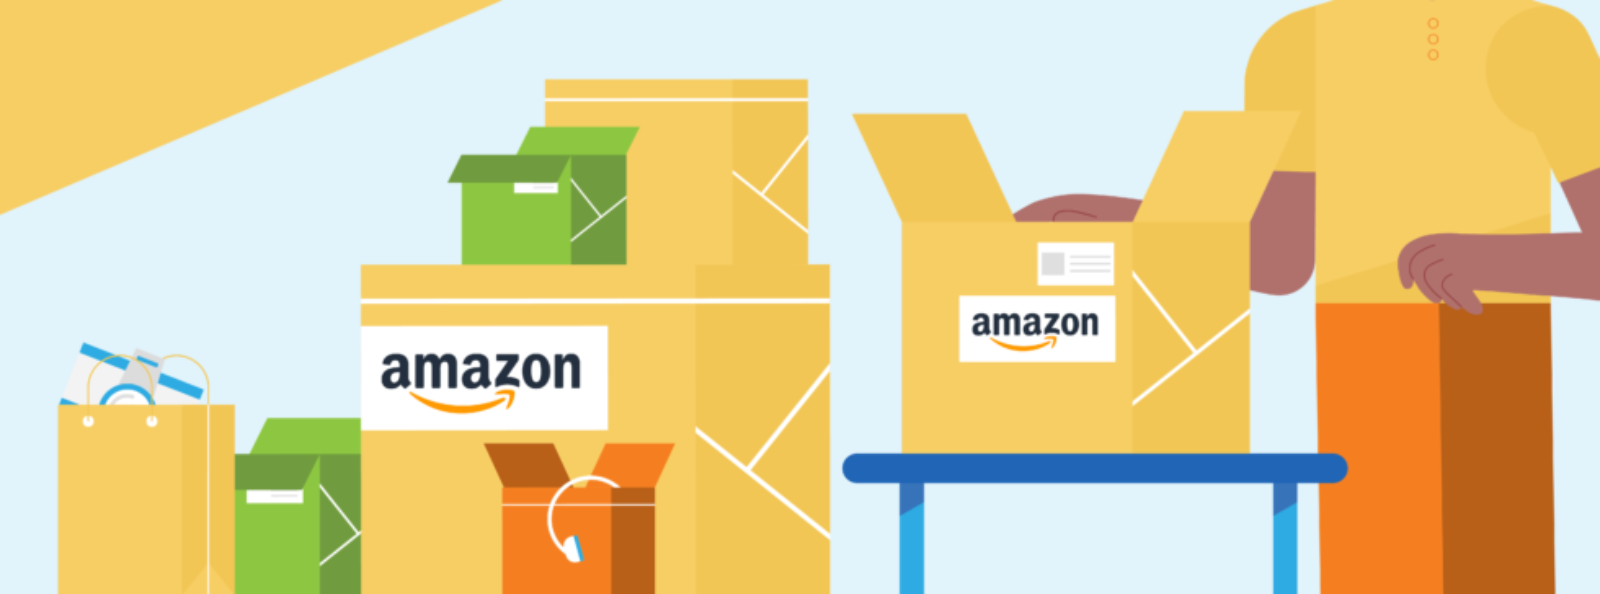 Amazon Packaging Design Services